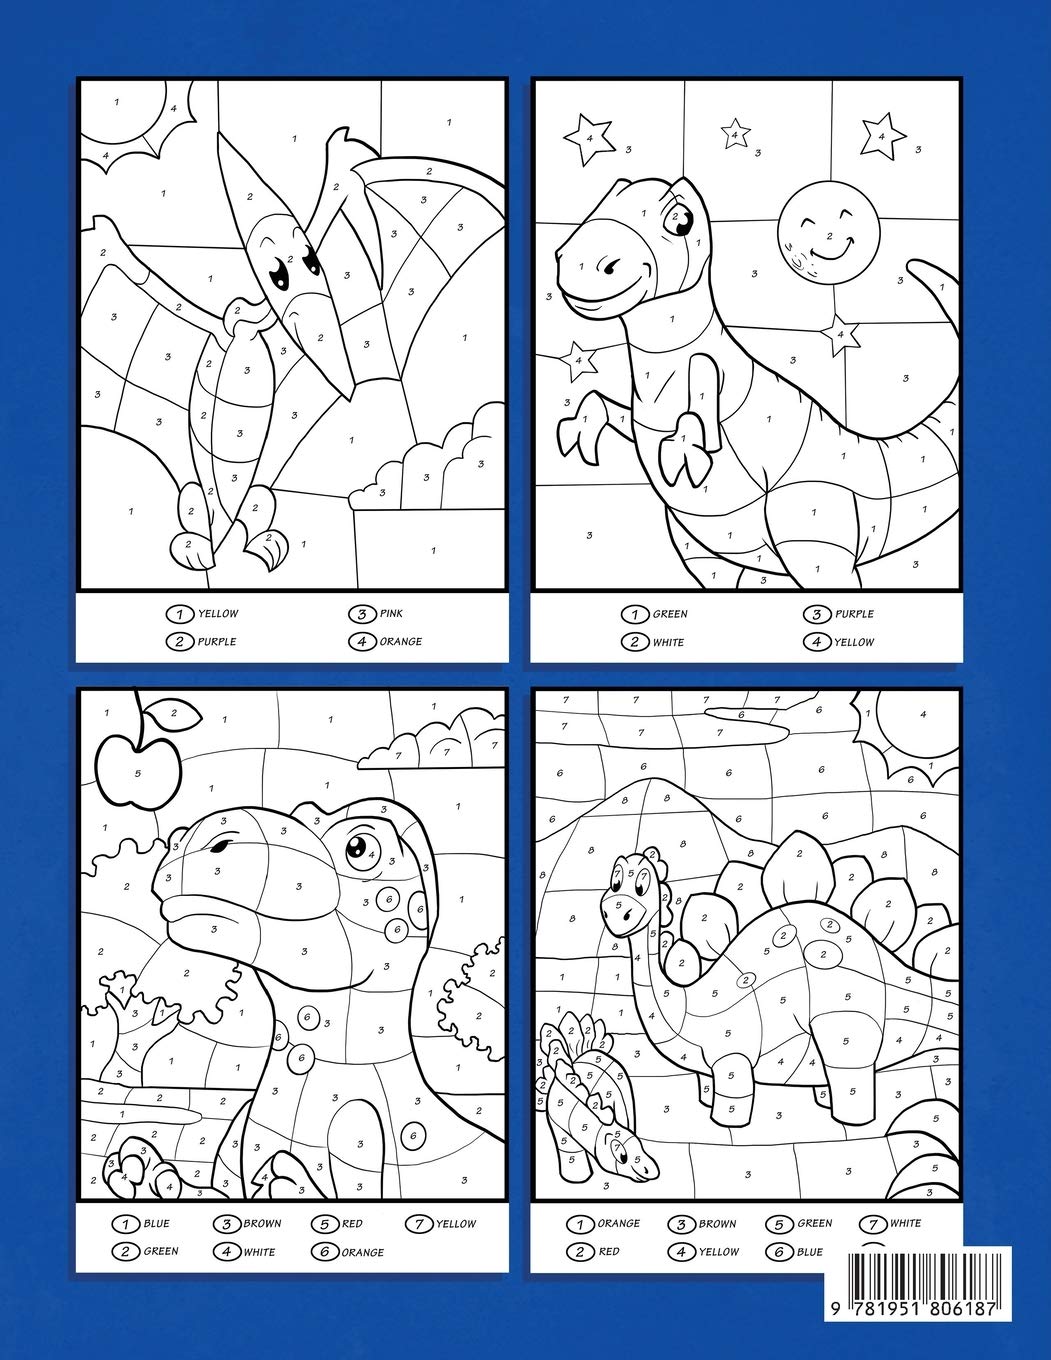 Dinosaur Color By Numbers: Coloring Book for Kids Ages 4-8